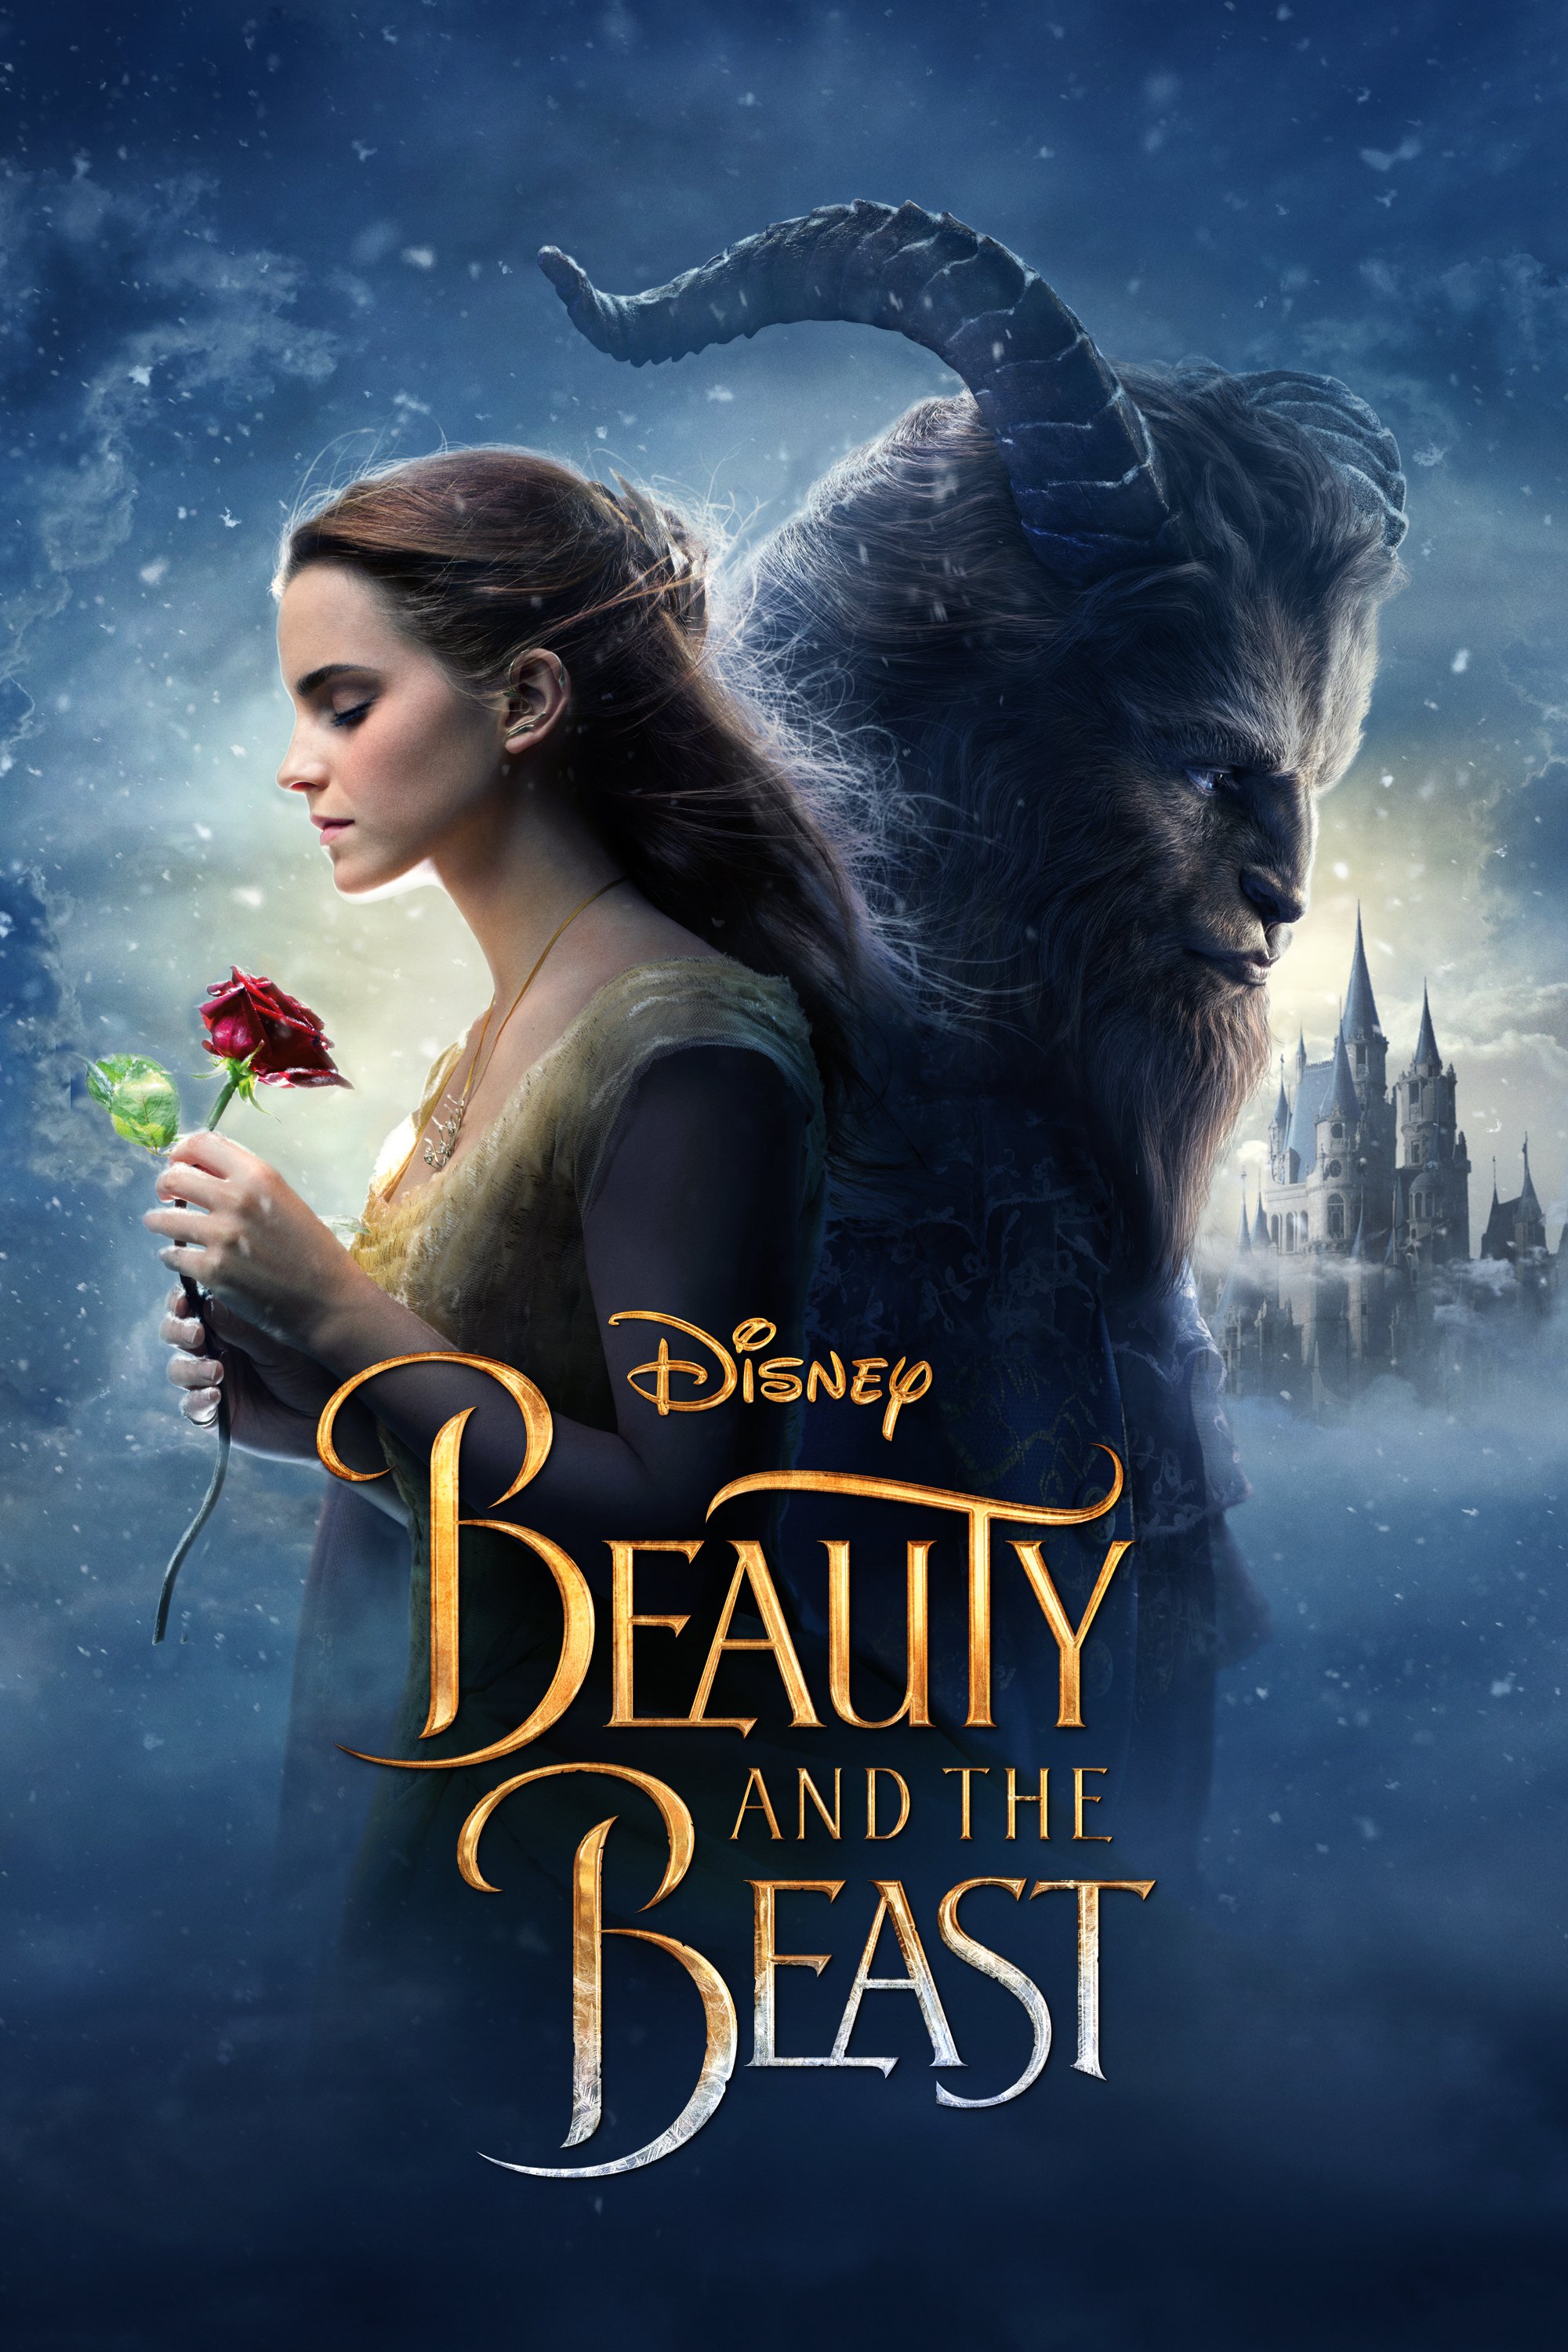 belle and the beast movie review